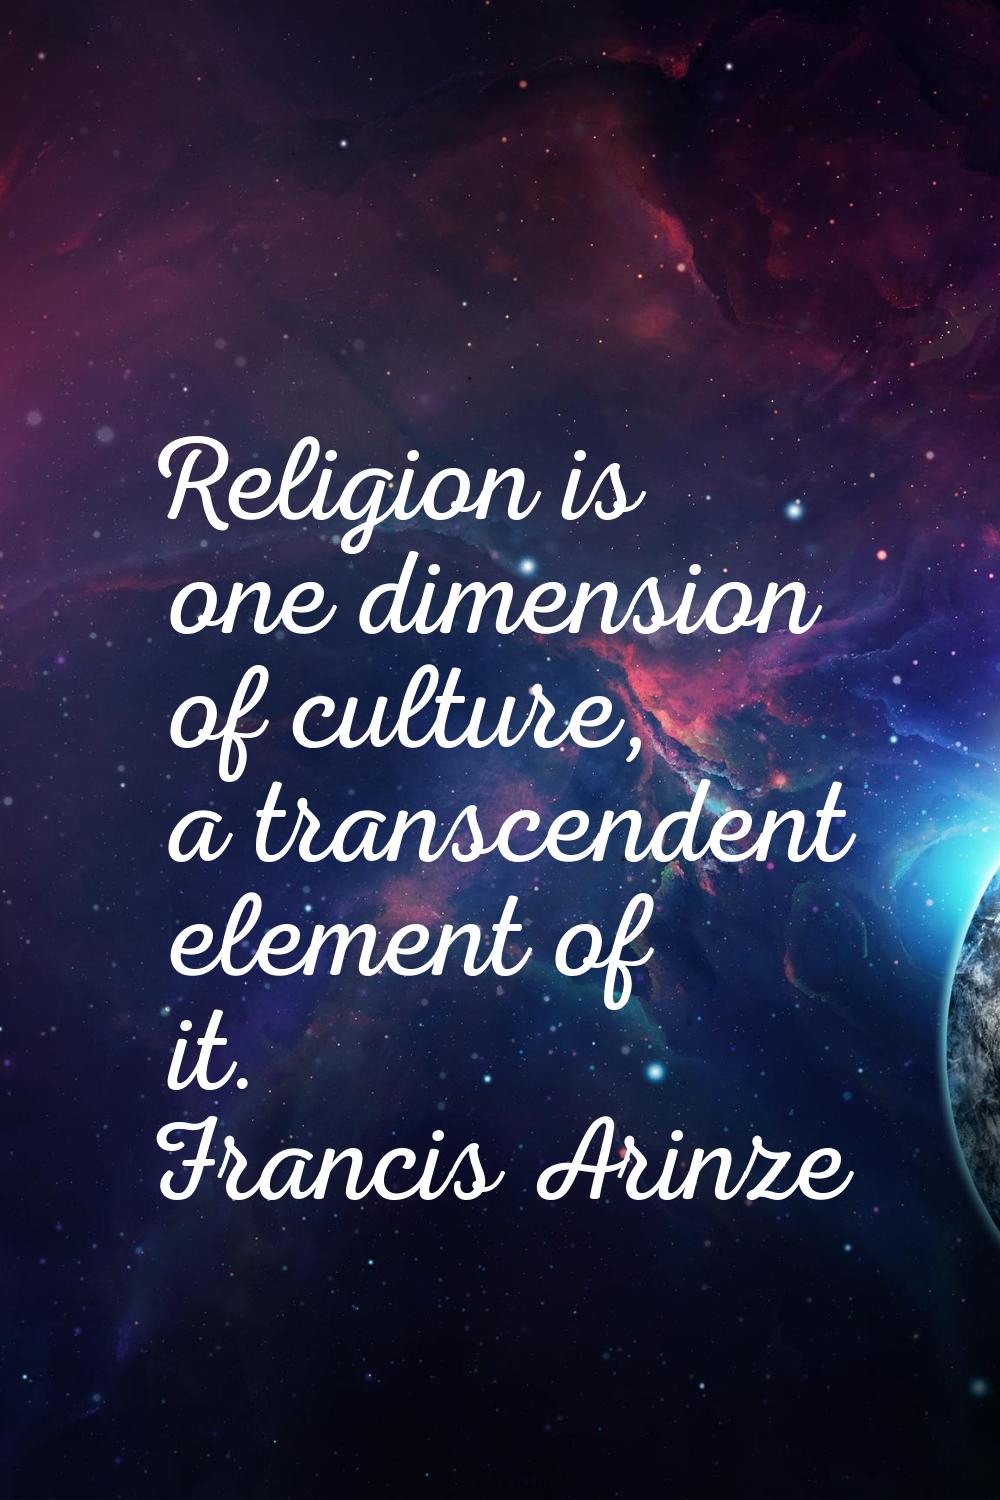 Religion is one dimension of culture, a transcendent element of it.